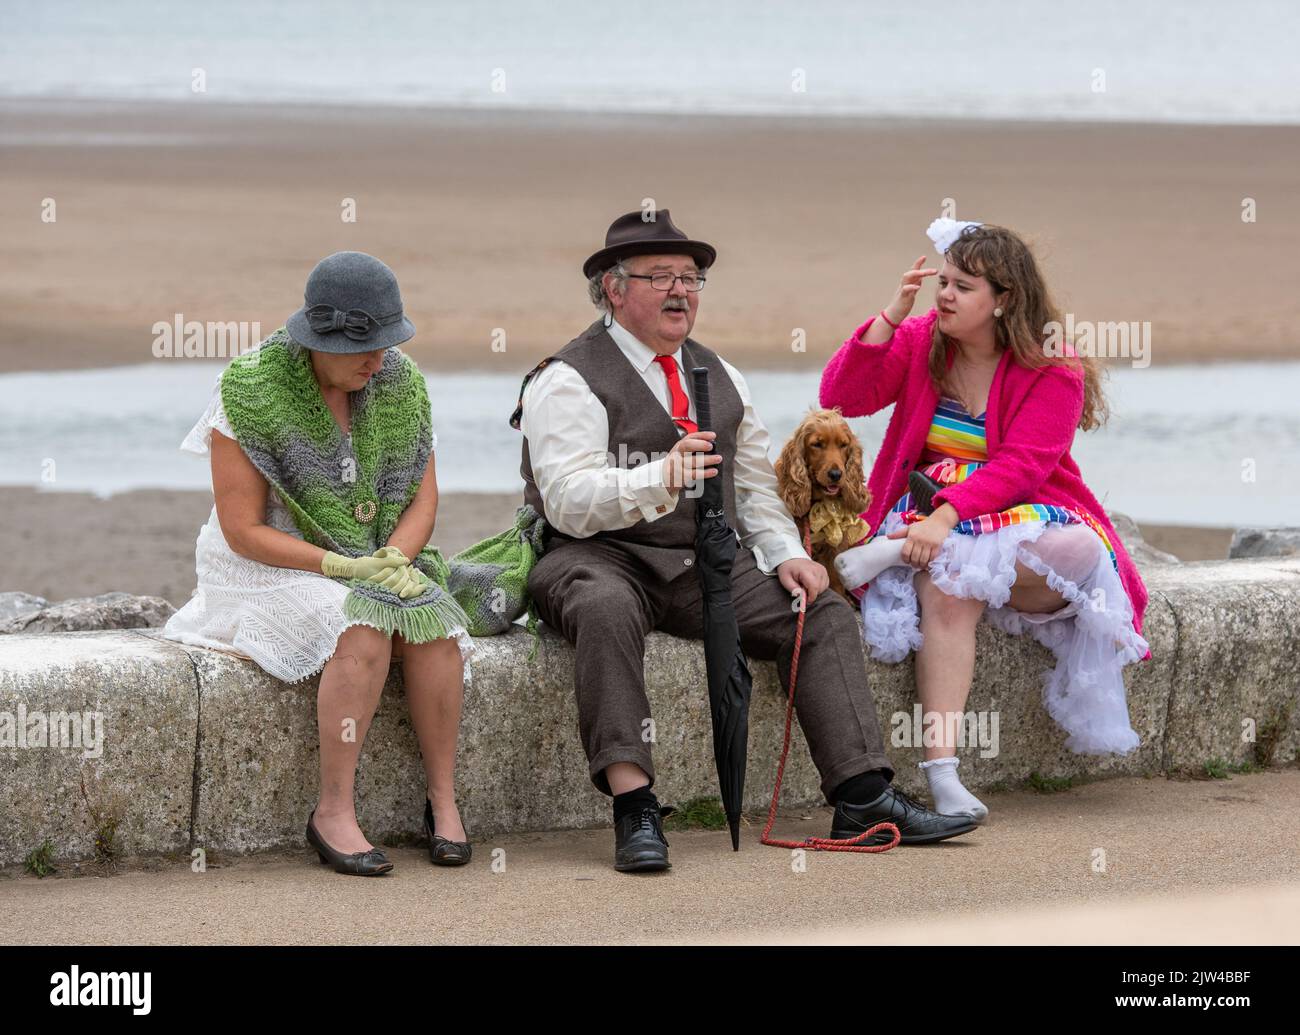 Morecambe, Lancashire, UK. 3rd Sep, 2022. Visitors in costume at the Vintage by the Sea Festival, Morecambe, UK. Credit: John Eveson/Alamy Live News Stock Photo